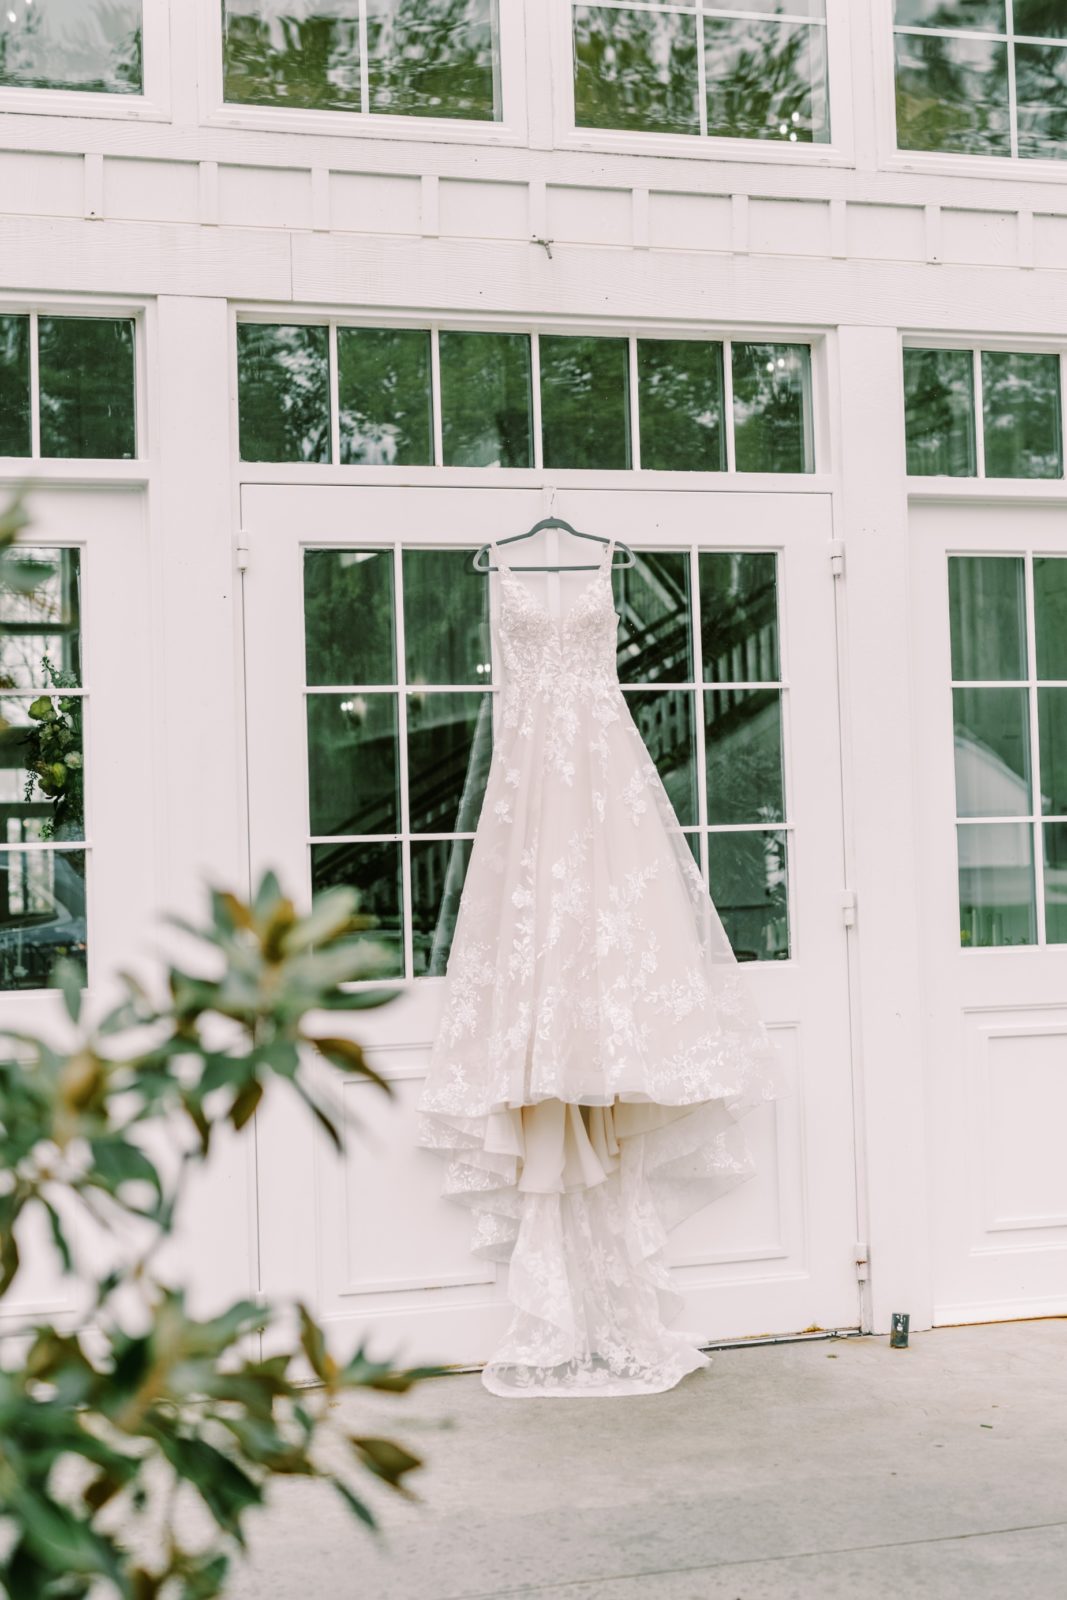 Lace wedding gown hanging up in a white window farmhouse in Houston by Christina Elliott Photography. lace wedding dress #ChristinaElliottPhotography #ChristinaElliottWeddings #Houstonweddings #TheSpringsVenue #farmhouse #EastHoustonweddings #Mrs #Mr